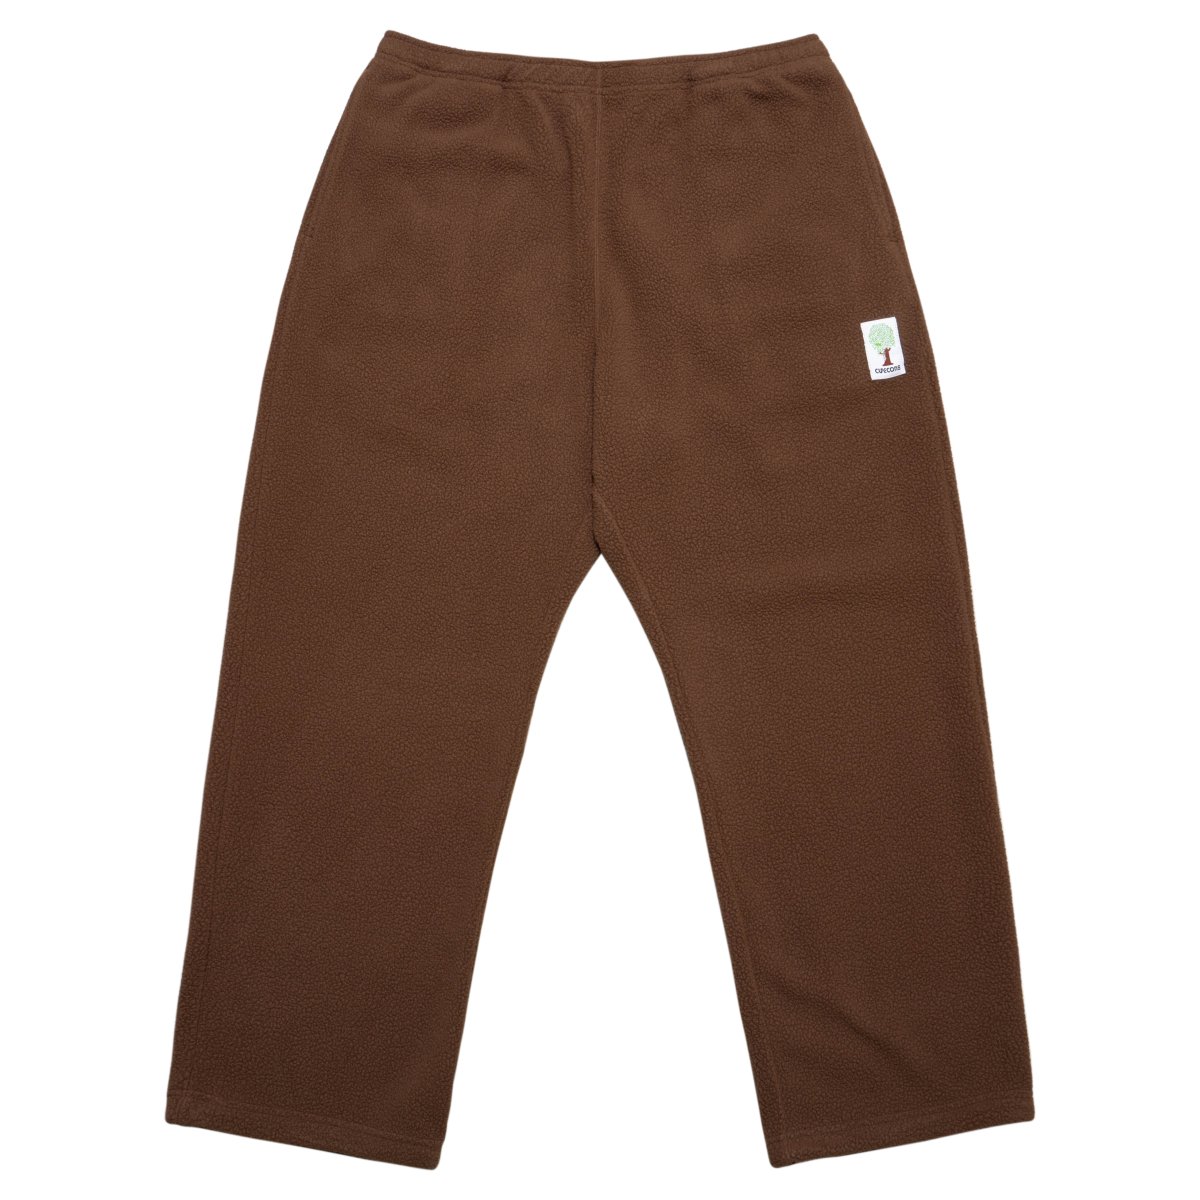 [SALE] Fleece Pants - Brown - CUP AND CONE